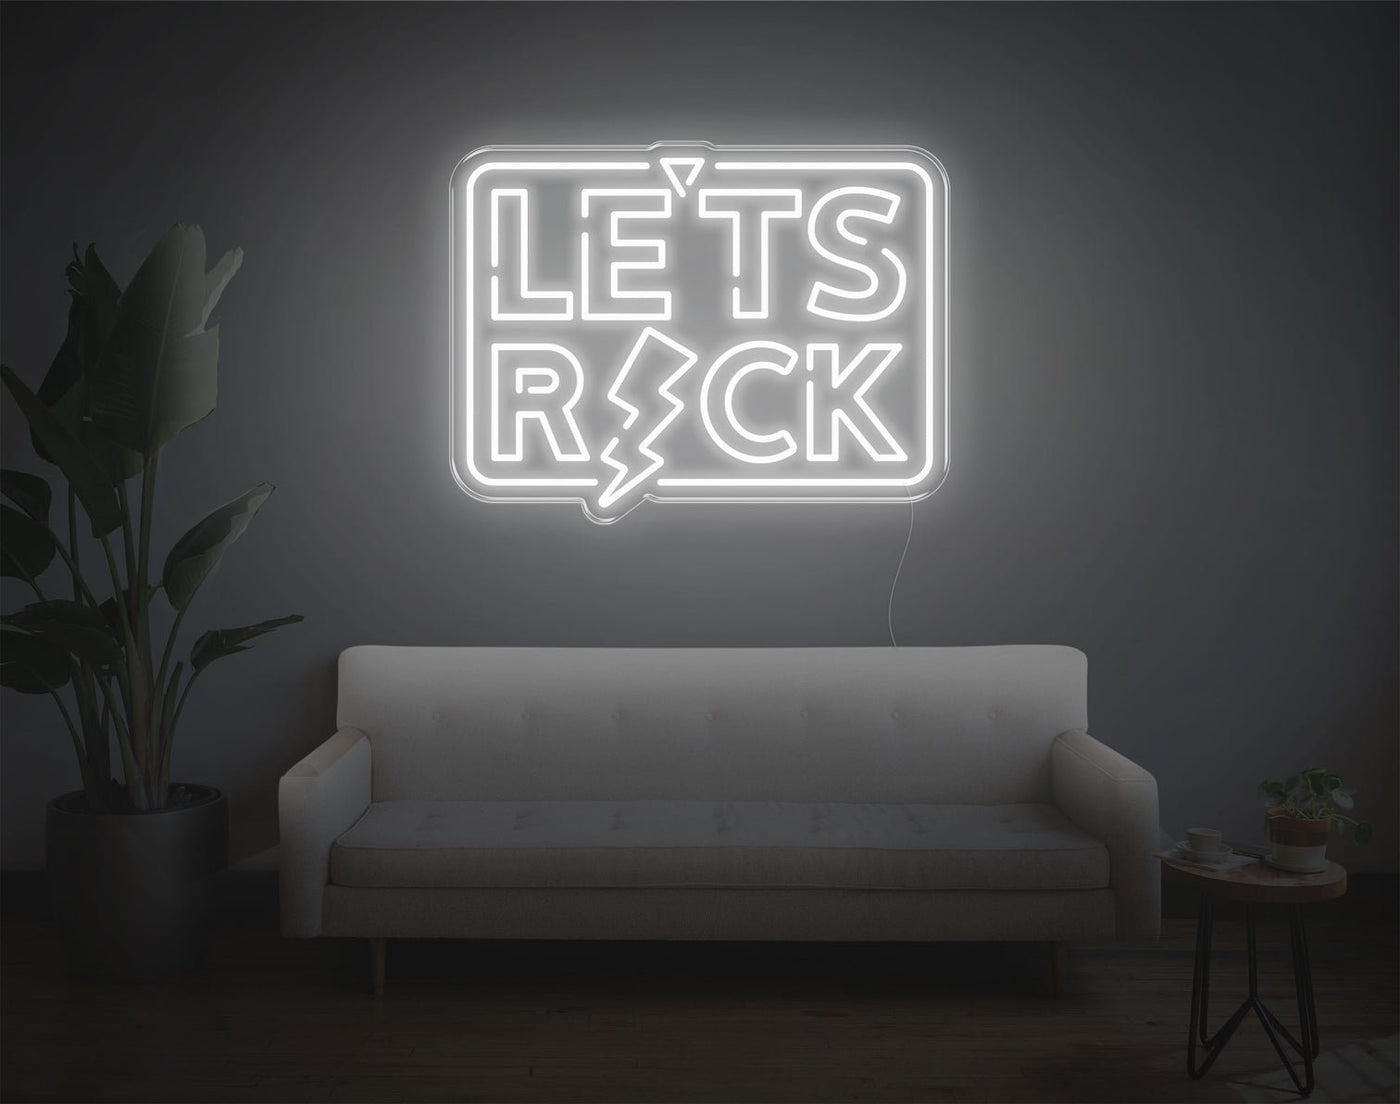 Let's Ricks LED Neon Sign - 19inch x 24inchHot Pink